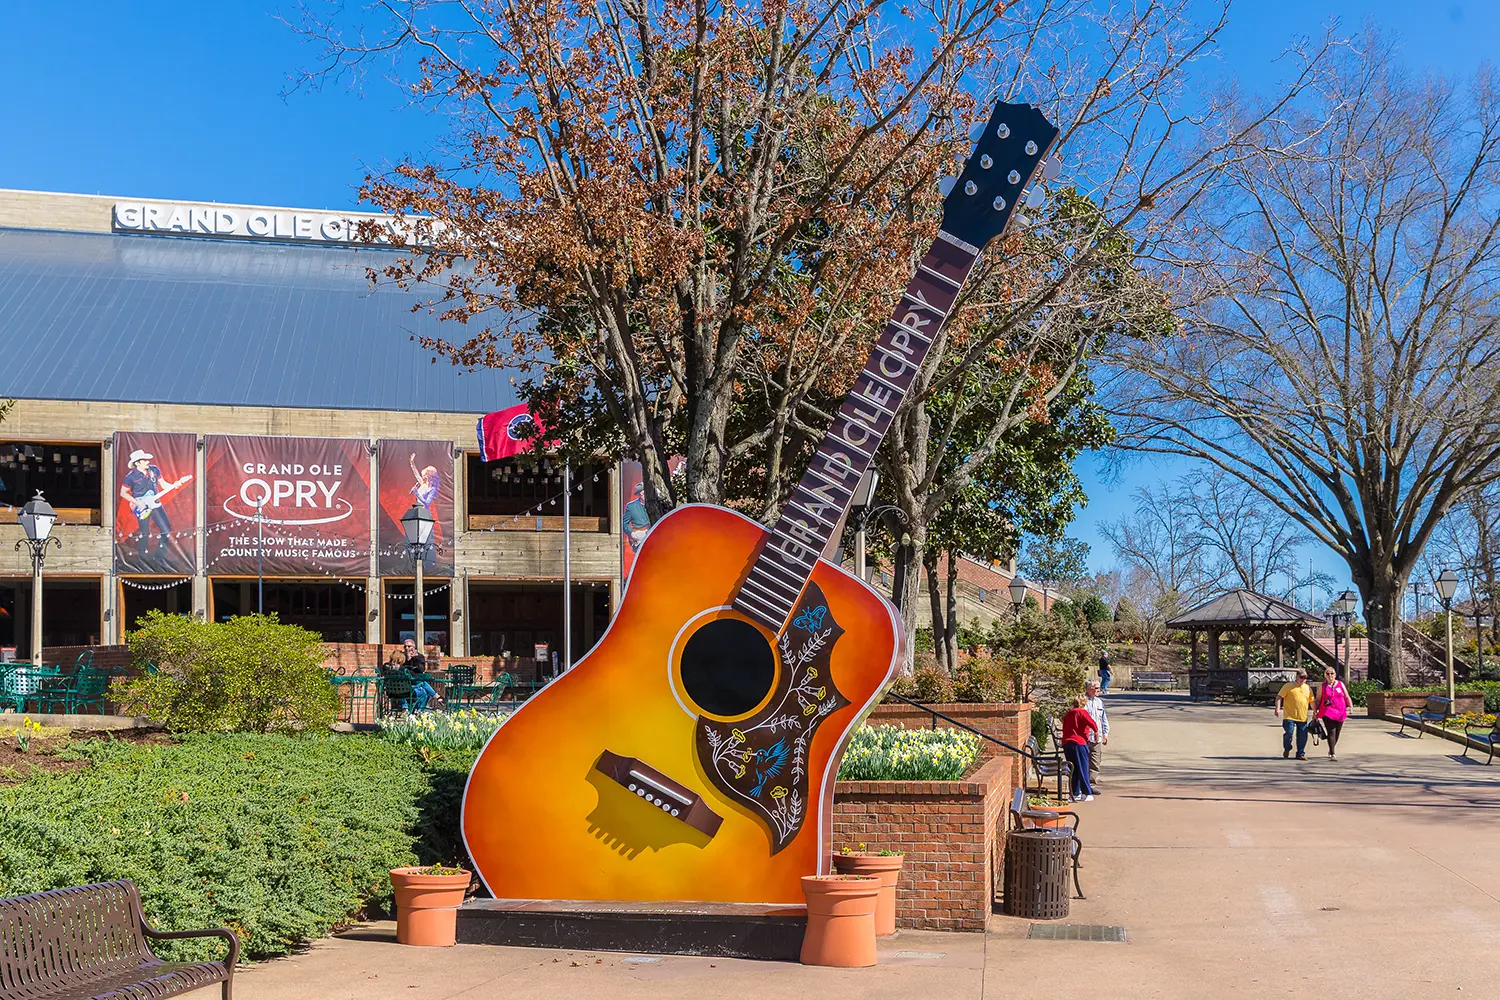 The Grand Ole Opry in Nashville, TN